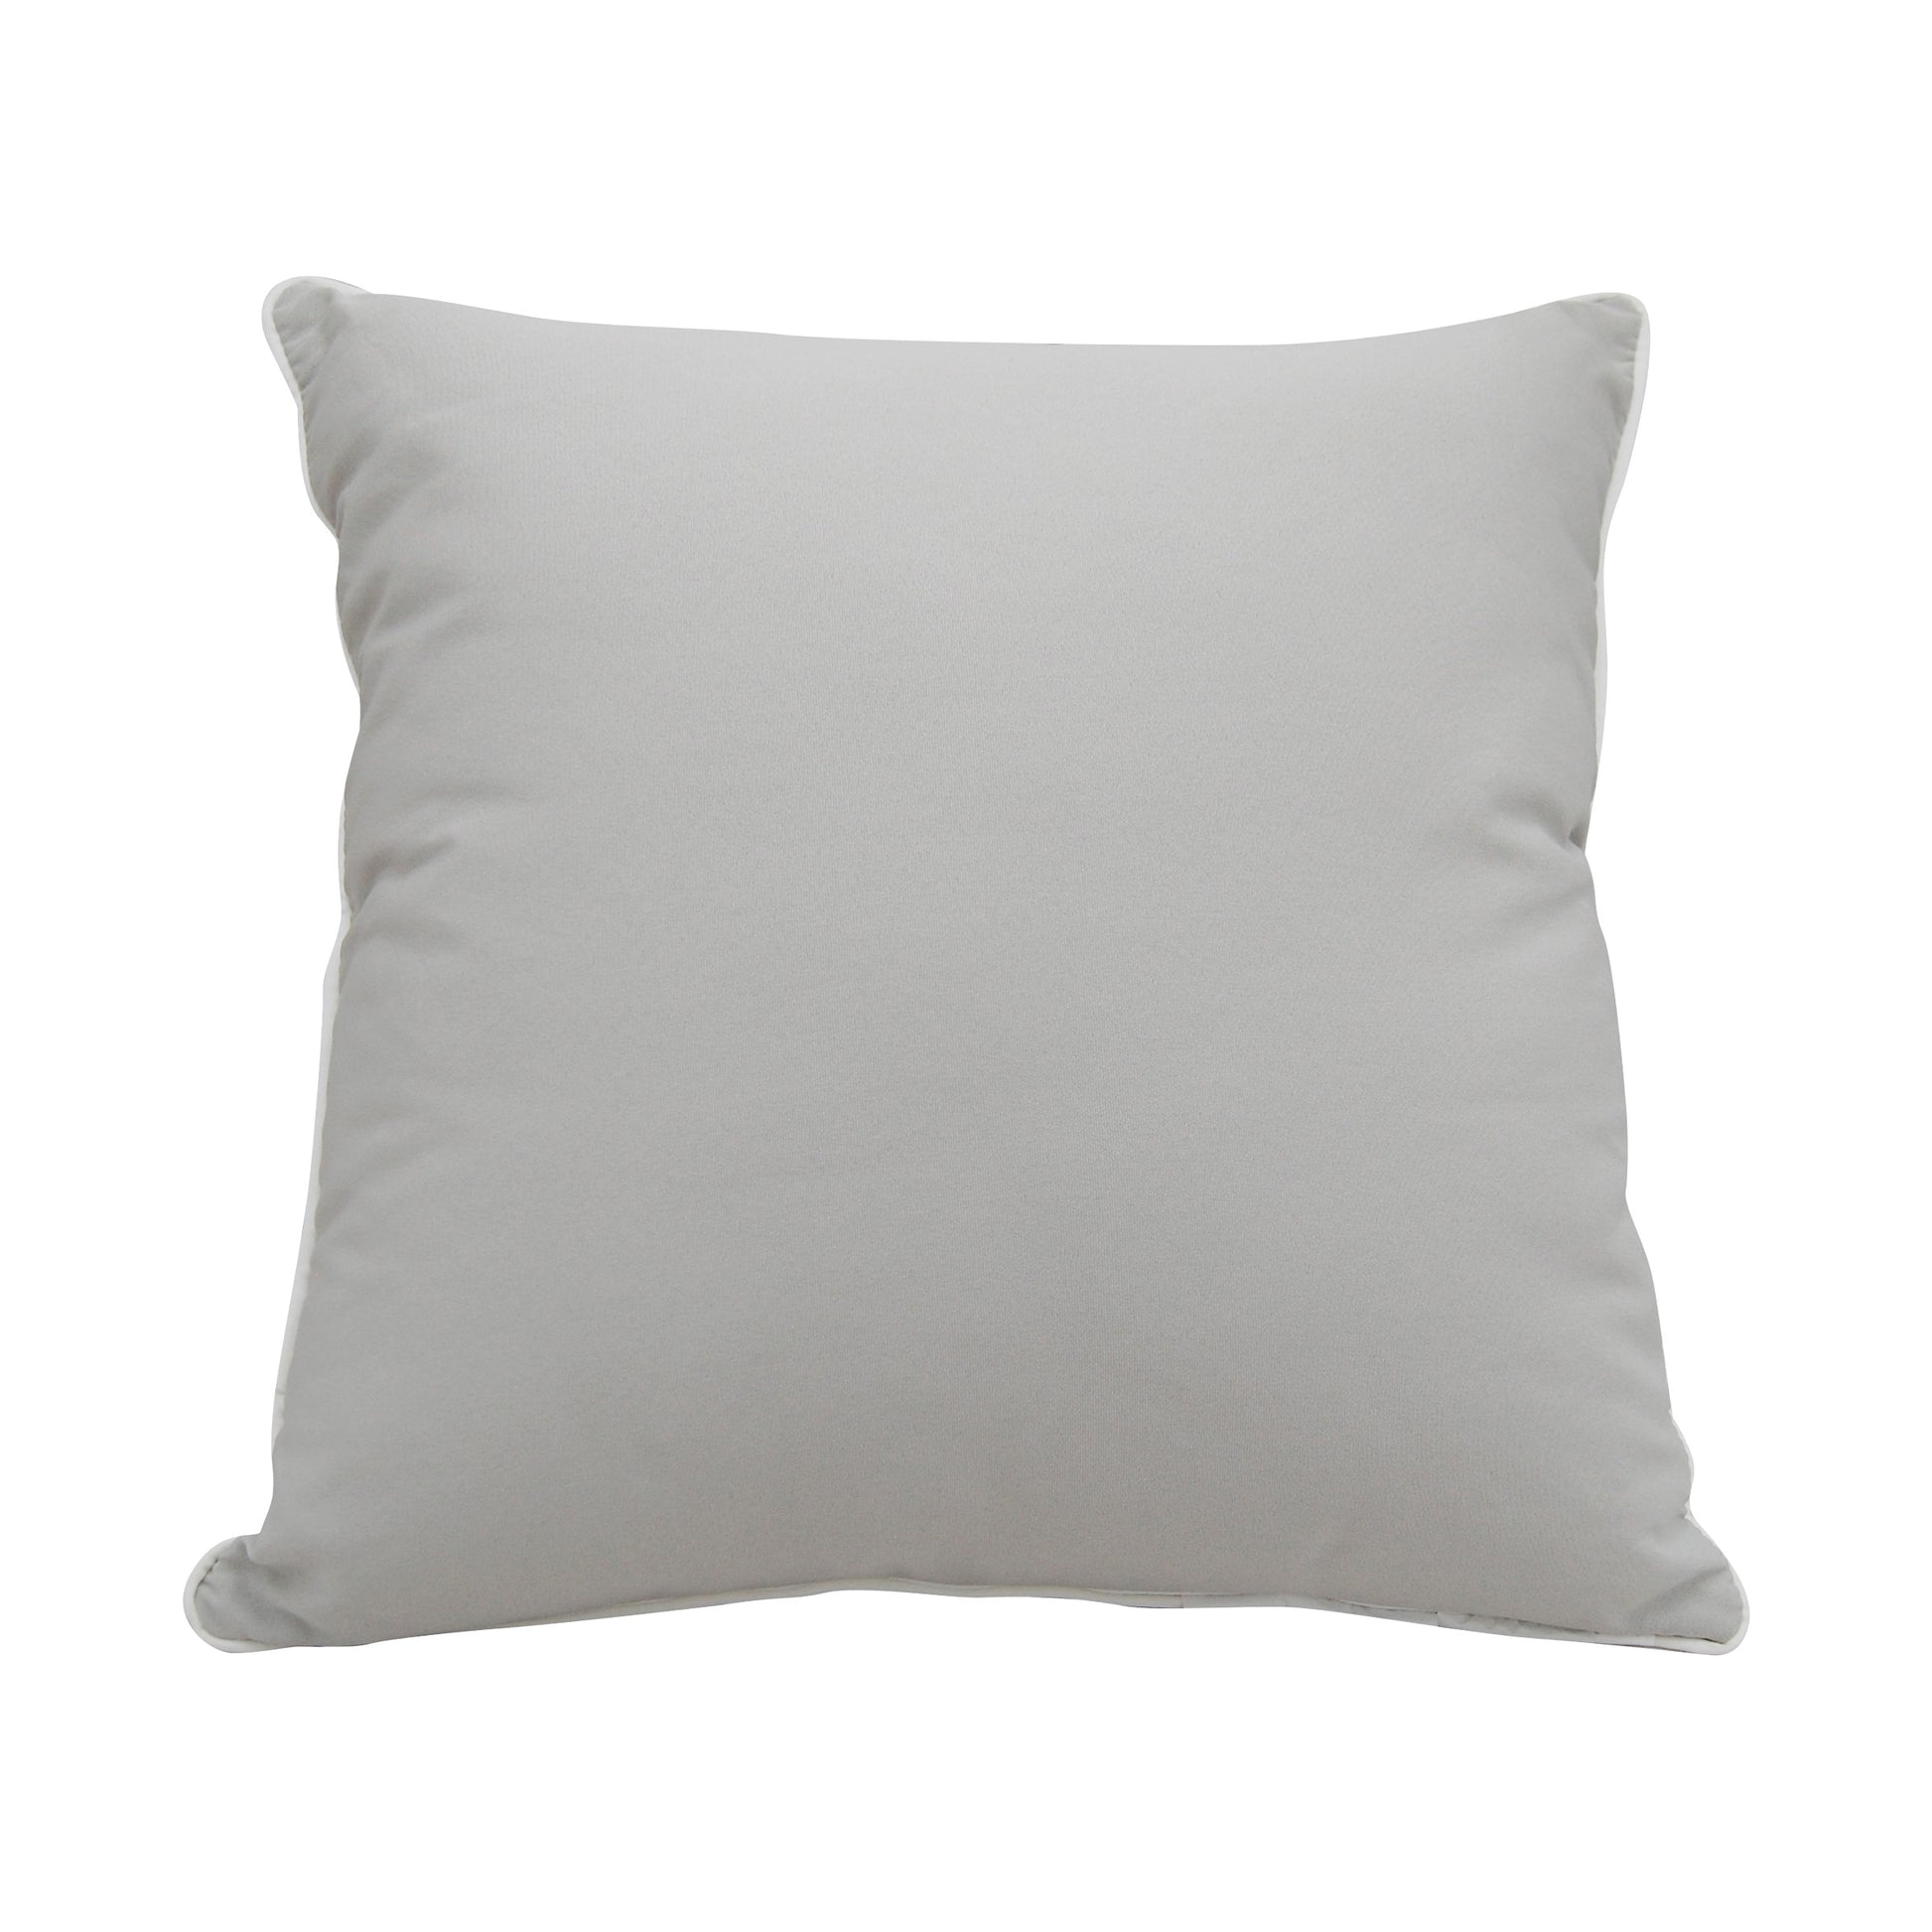 Solid gray fabric; back of the Lake Feather Pattern Lumbar Indoor Outdoor Pillow.